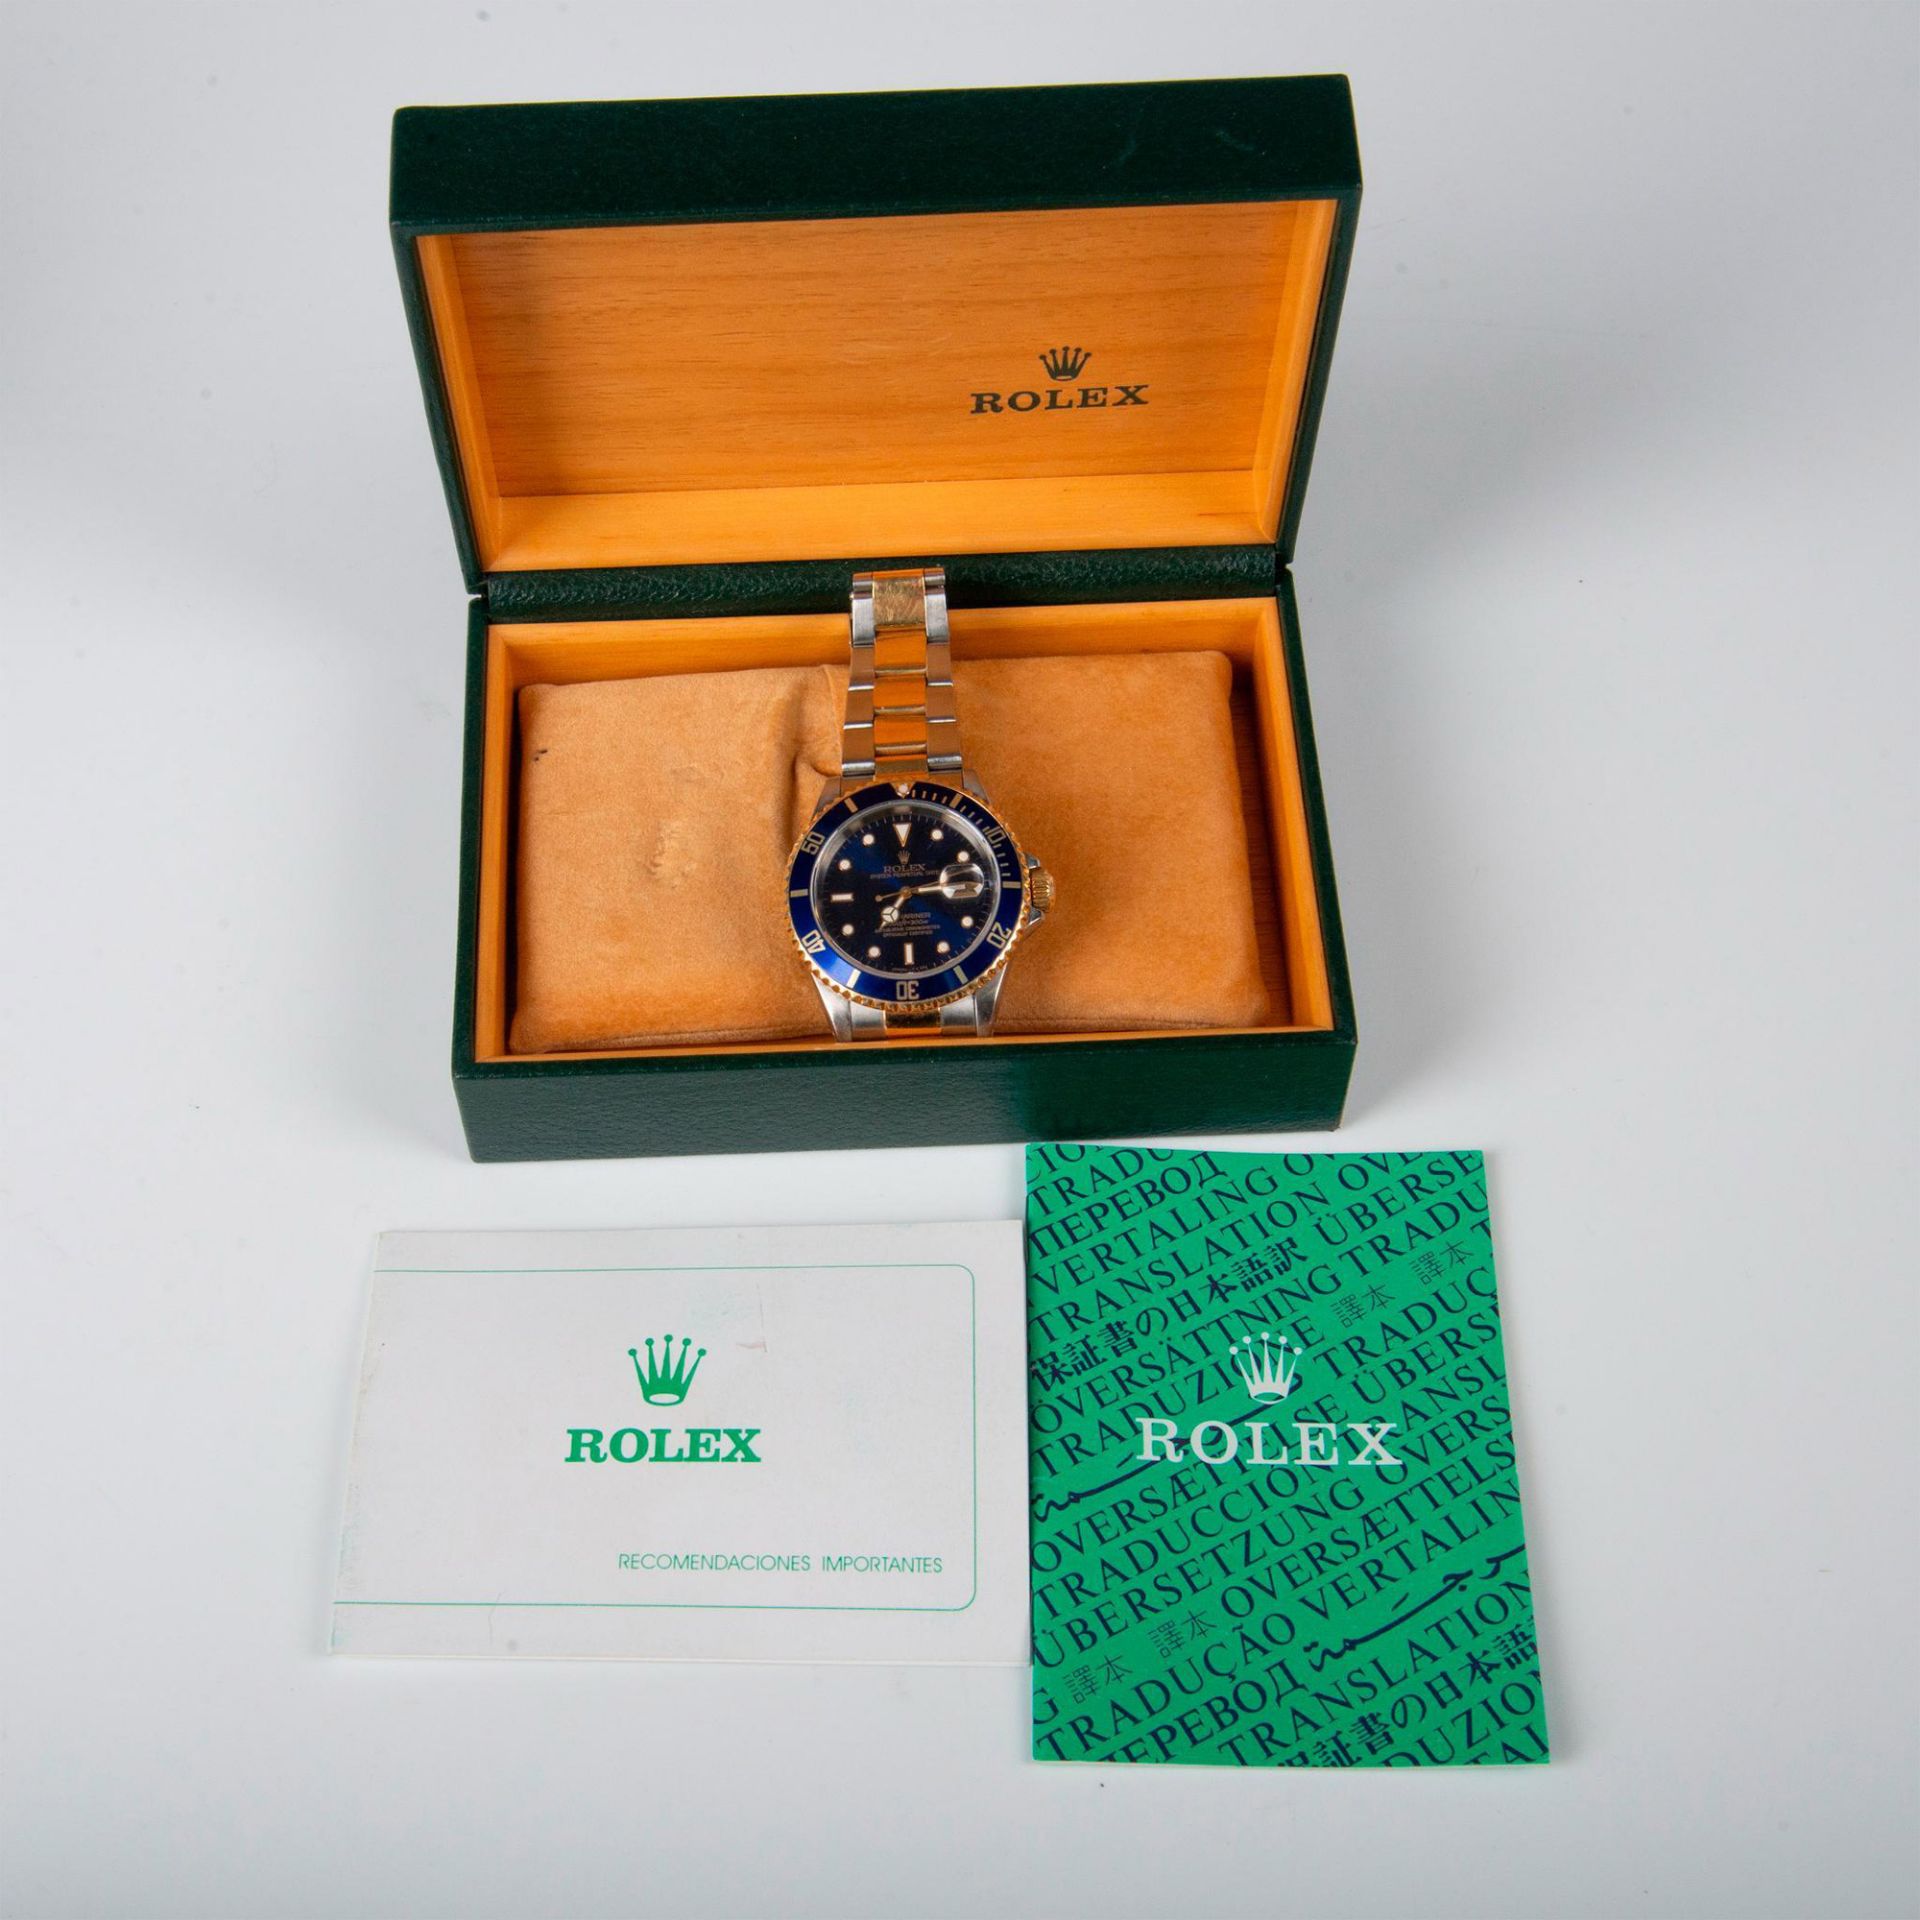 Rolex Submariner Oyster Perpetual Date Watch - Image 14 of 18